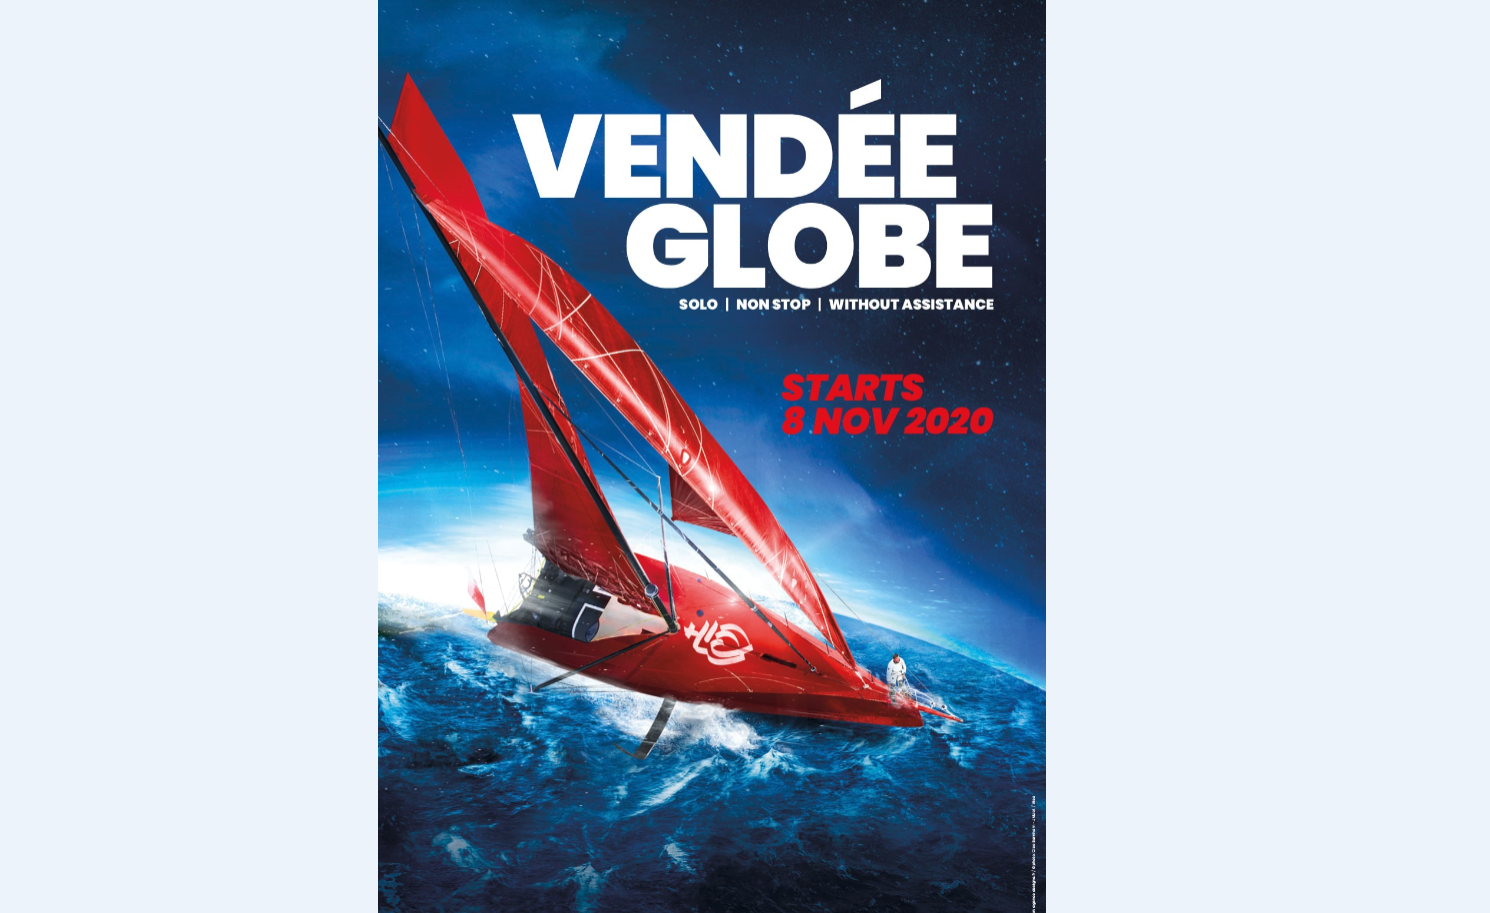 The Vendée Globe poster: the identity is conserved and the dynamic is updated